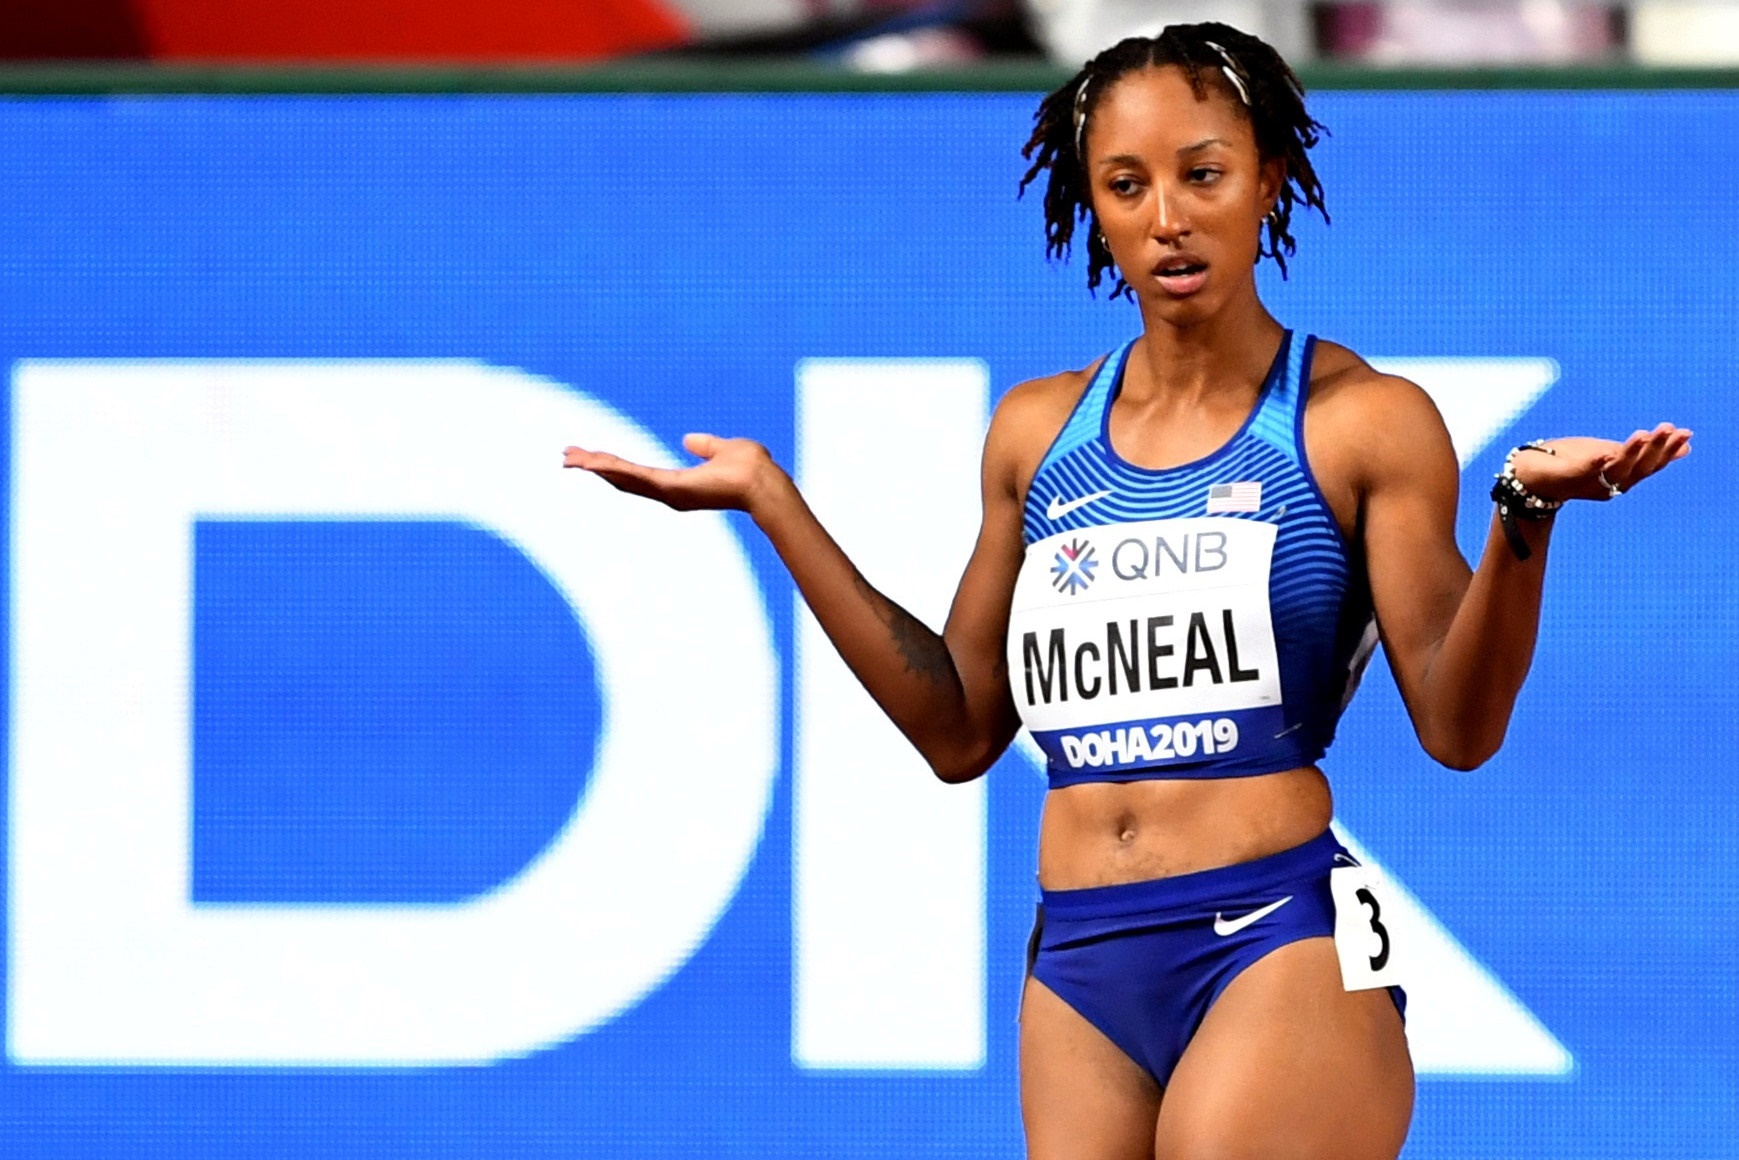 Olympic Hurdles Champion McNeal Denies Testing Positive for Banned Substance